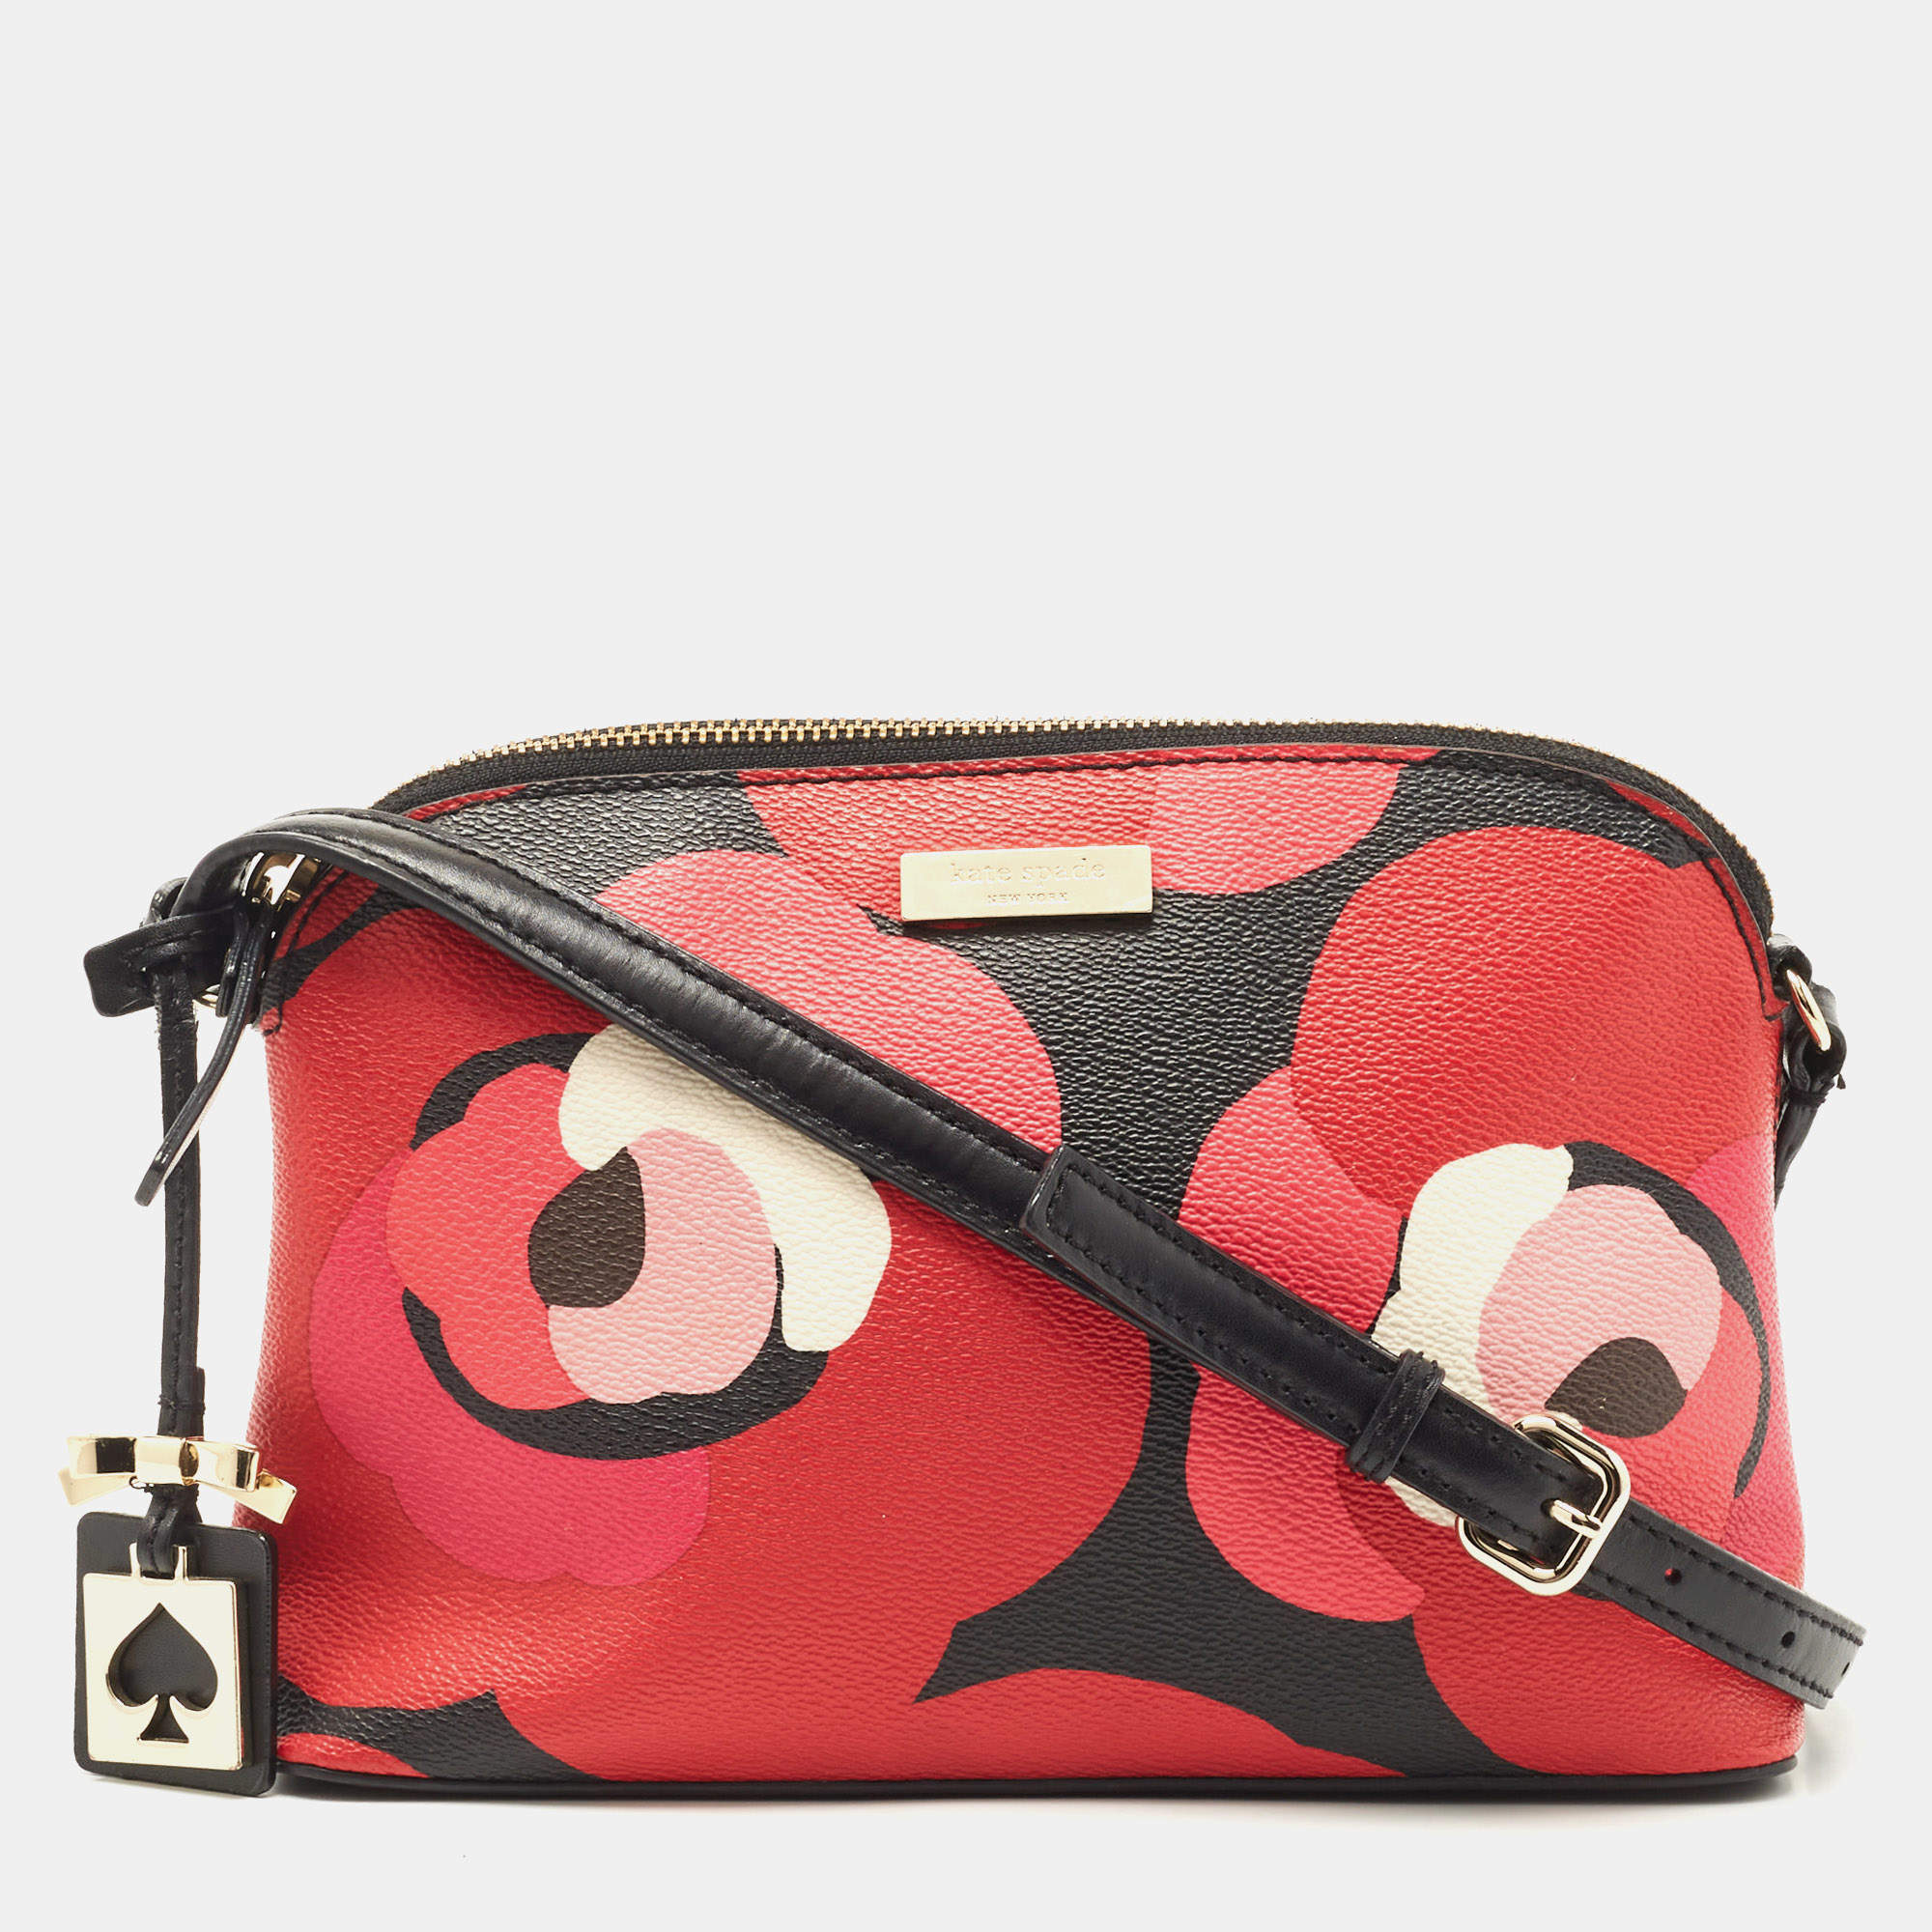 Authentic Kate Spade Red Cross Body / Purse